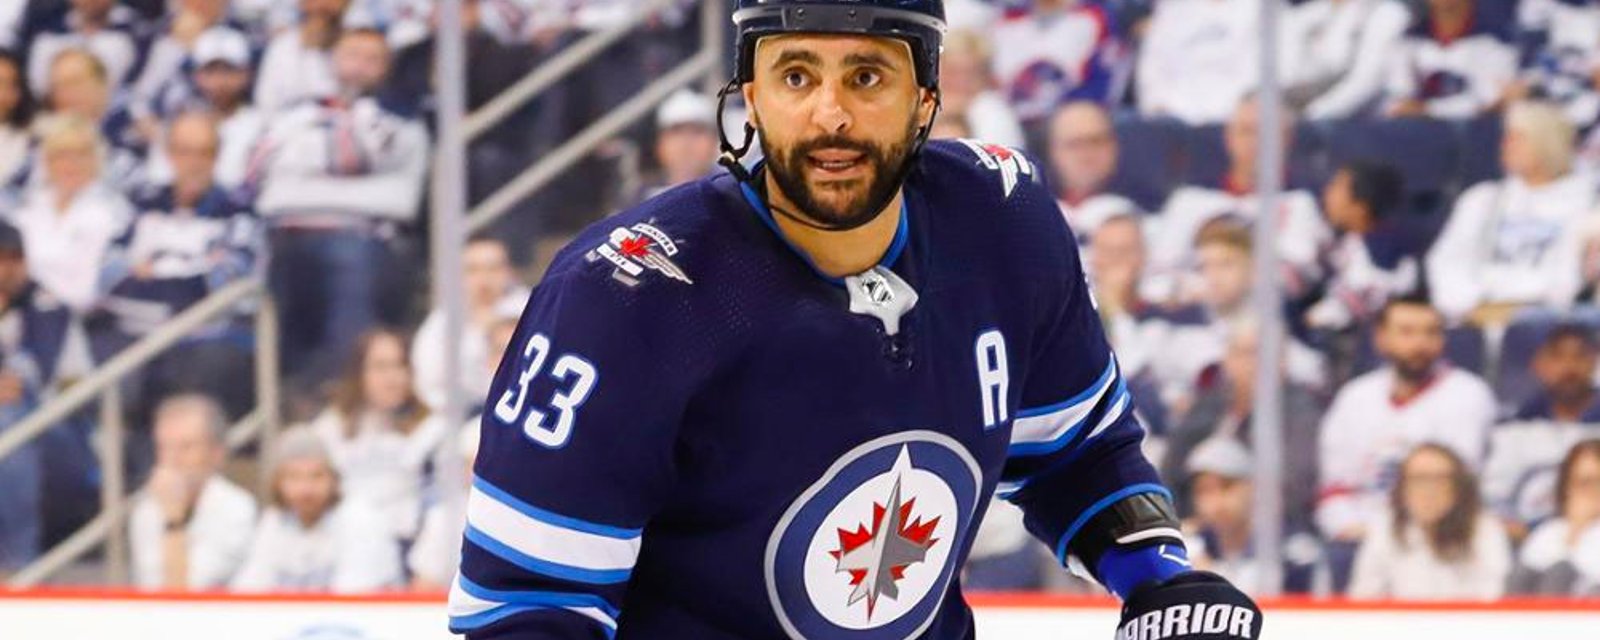 Byfuglien officially appeals his suspension